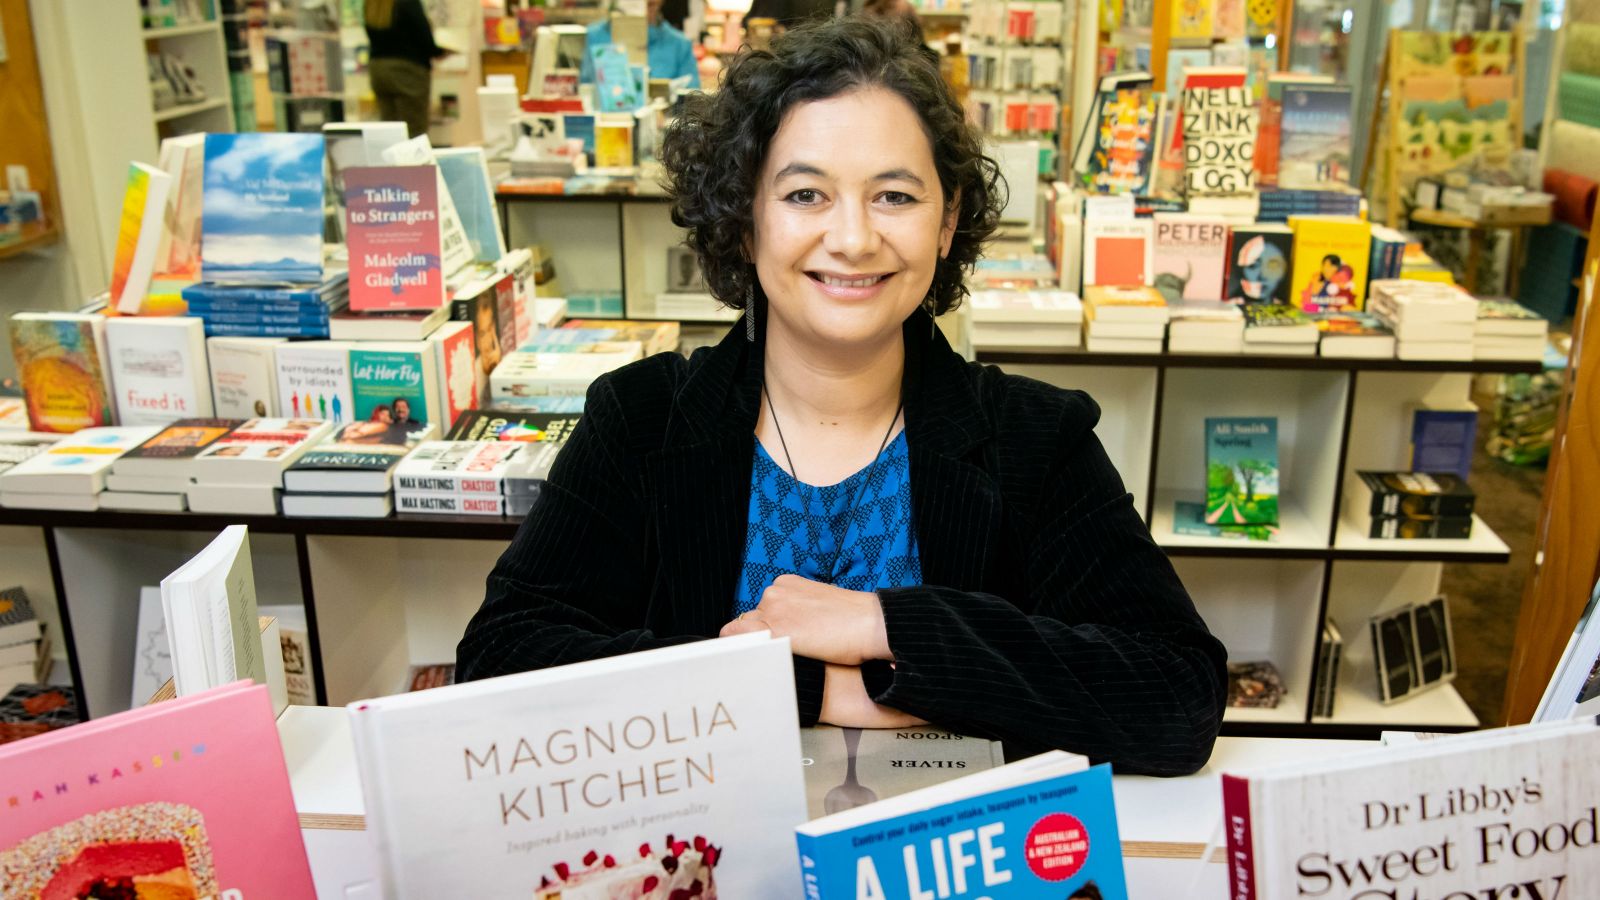 Lisa Te Morenga posing for a photo in a bookshop with books about sugar in the foreground.